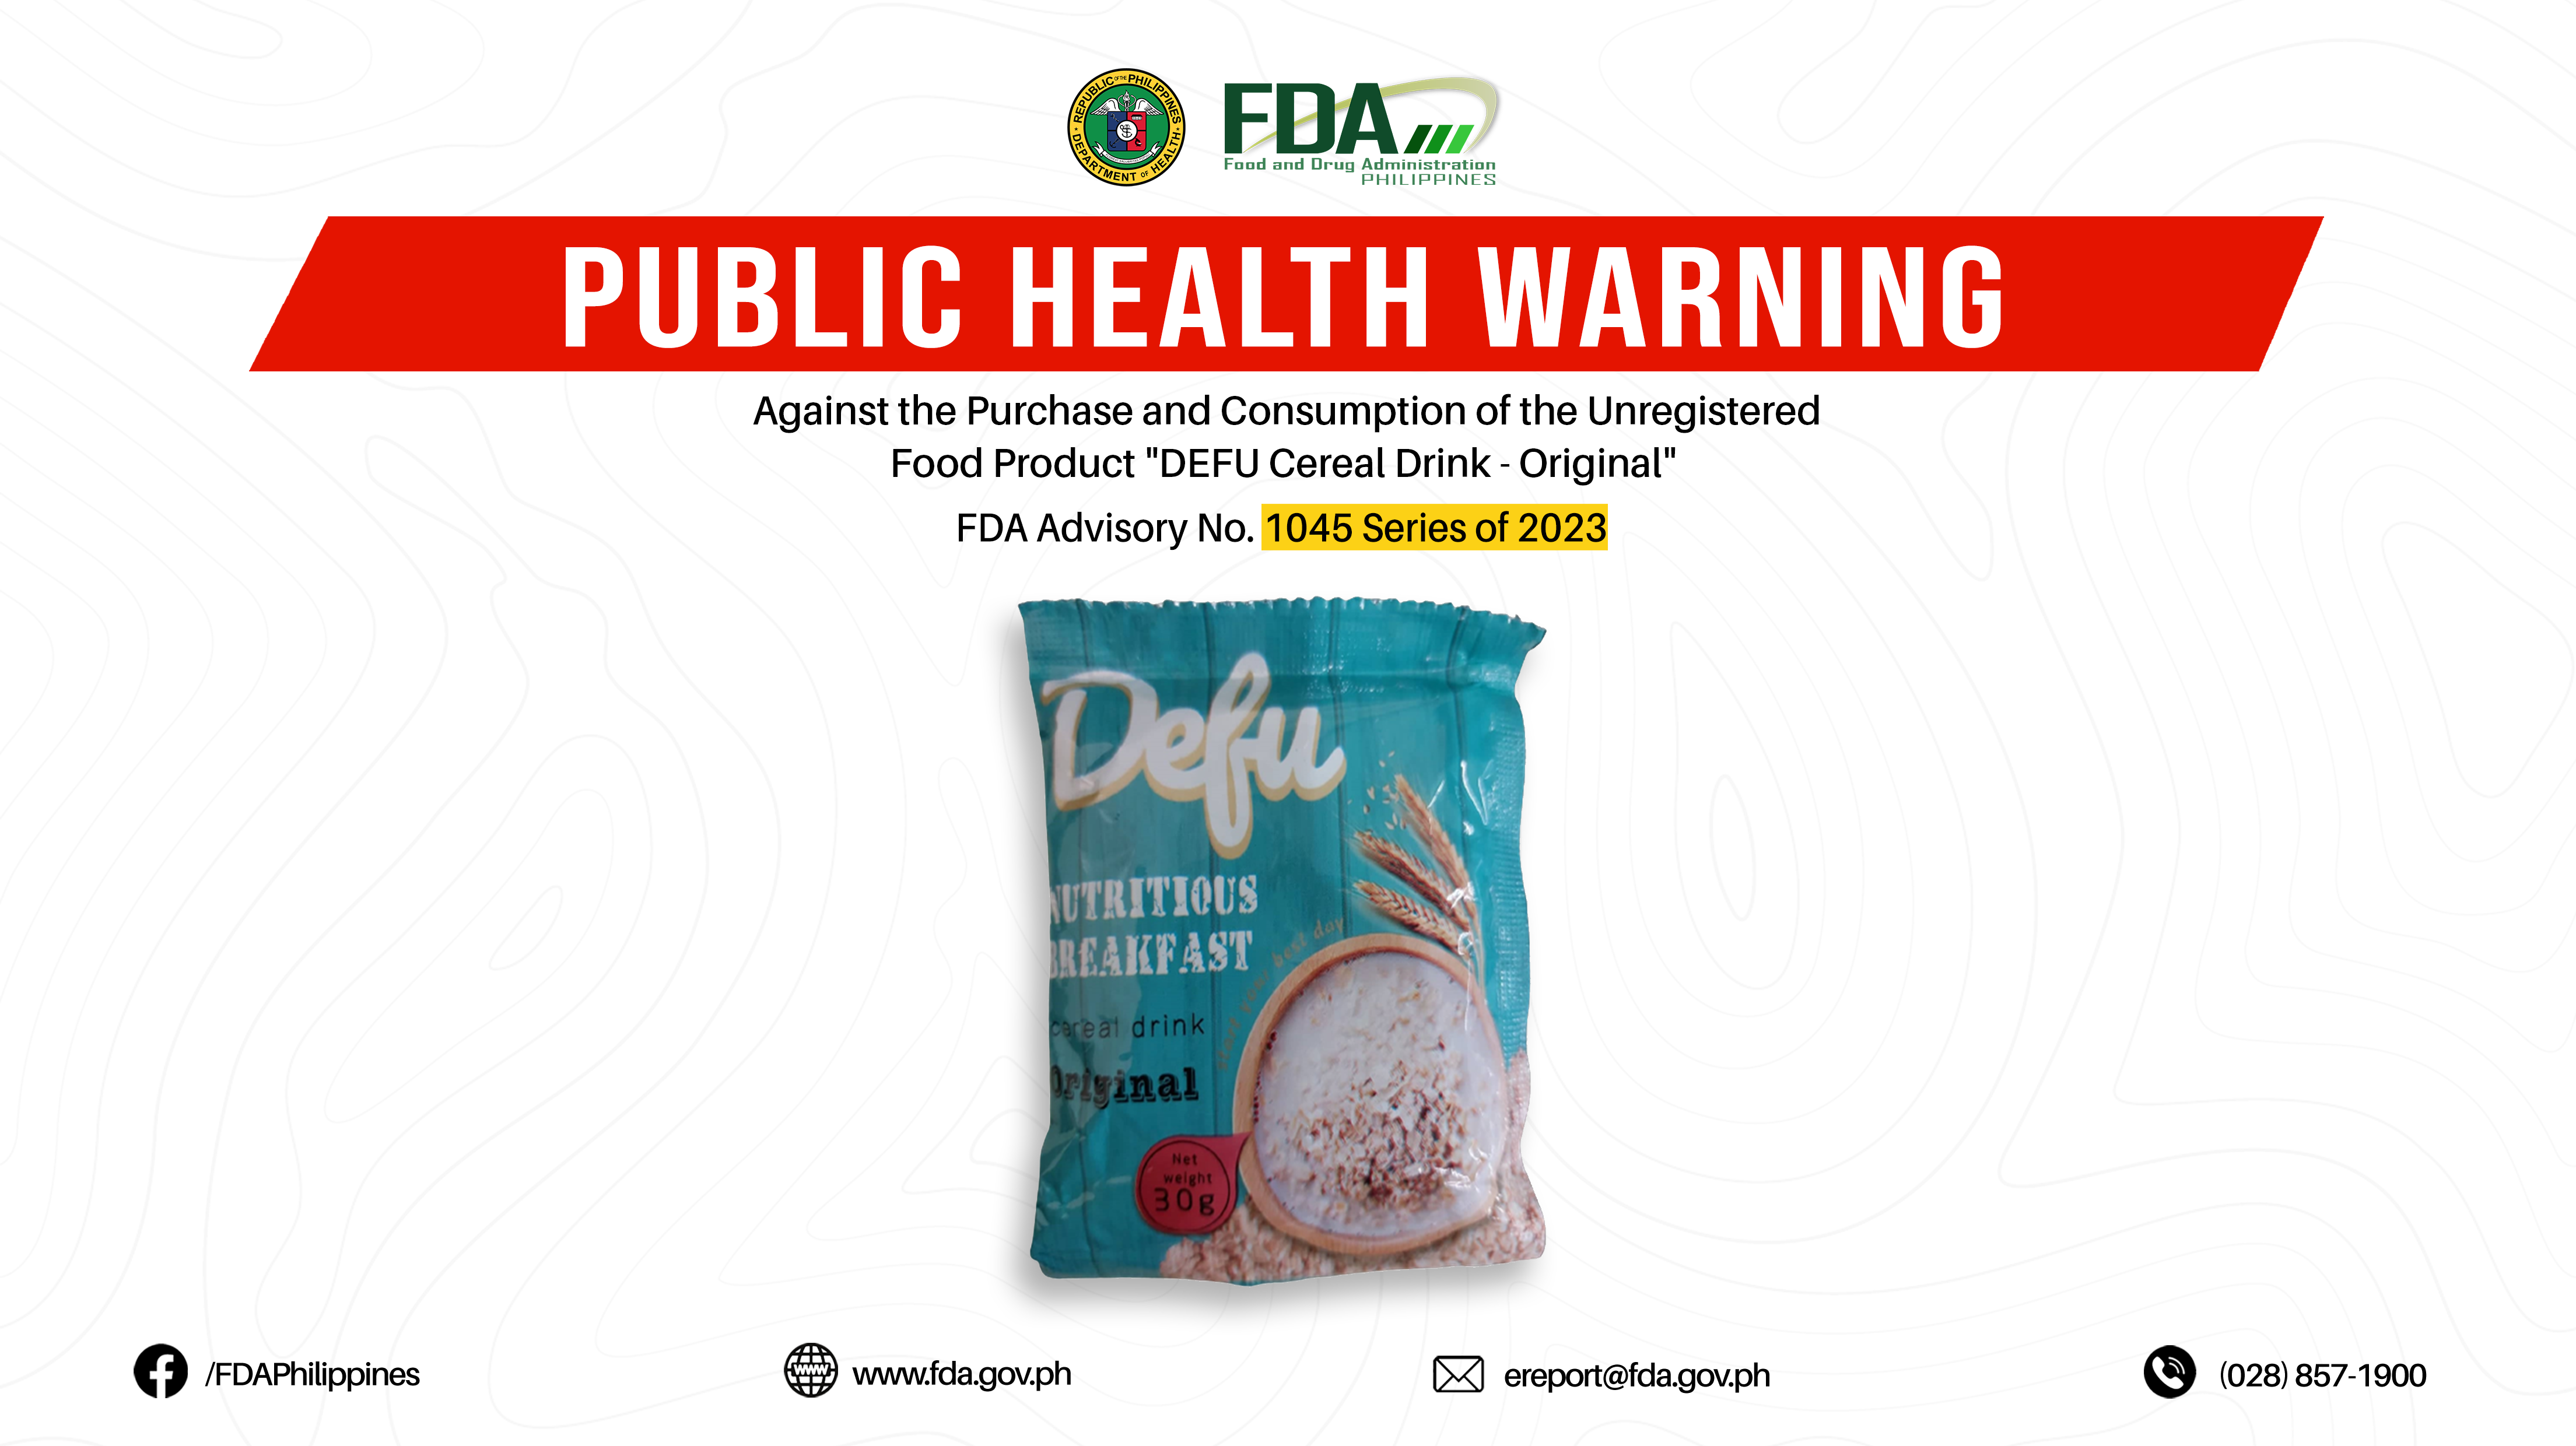 FDA Advisory No.2023-1029 || Public Health Warning Against the Purchase and Consumption of the Unregistered Food Product “EDGELINE PILI PRODUCTS Pili Brittle”